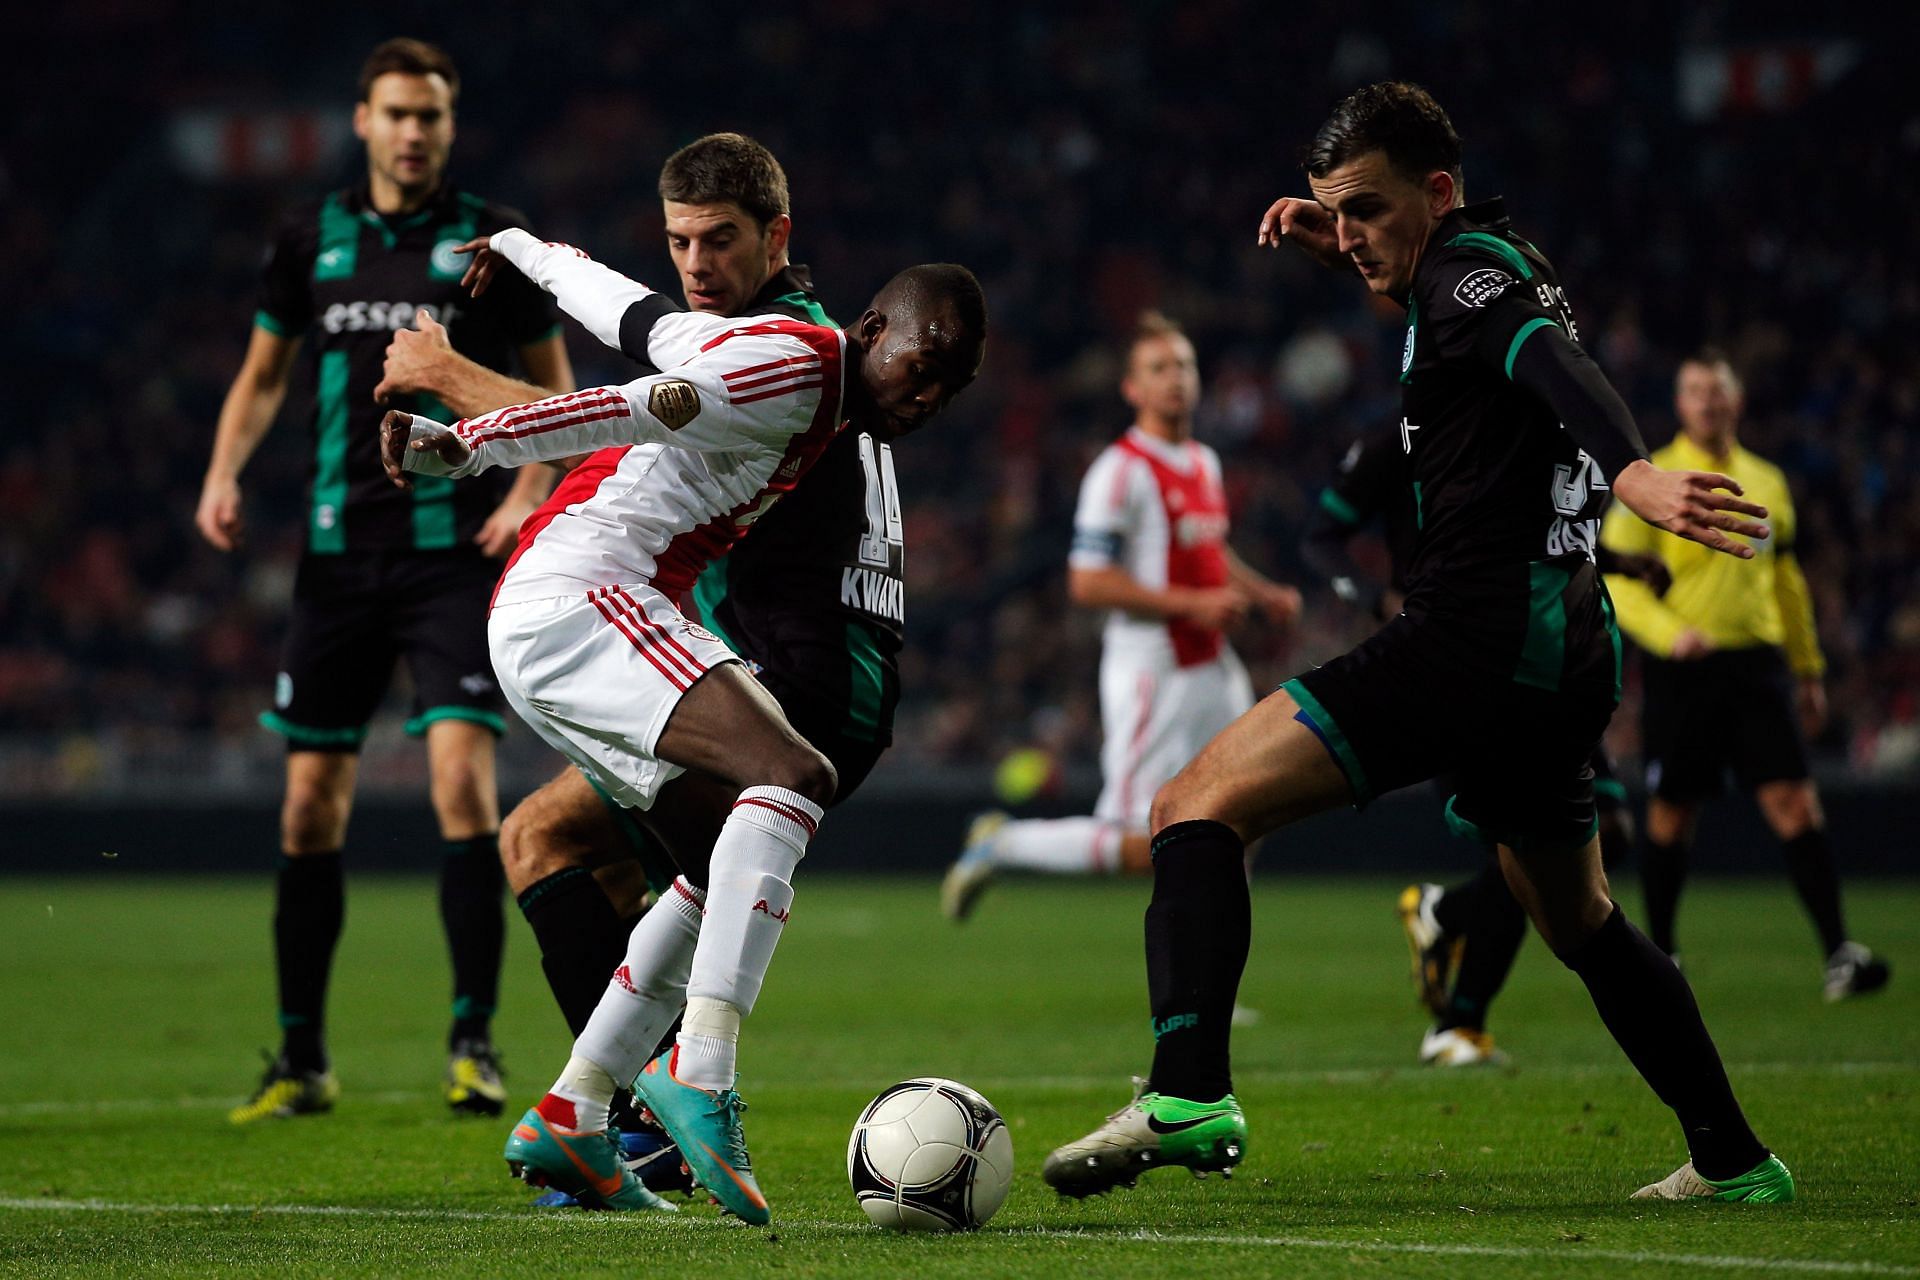 Ajax have lost their last two away games to Groningen.